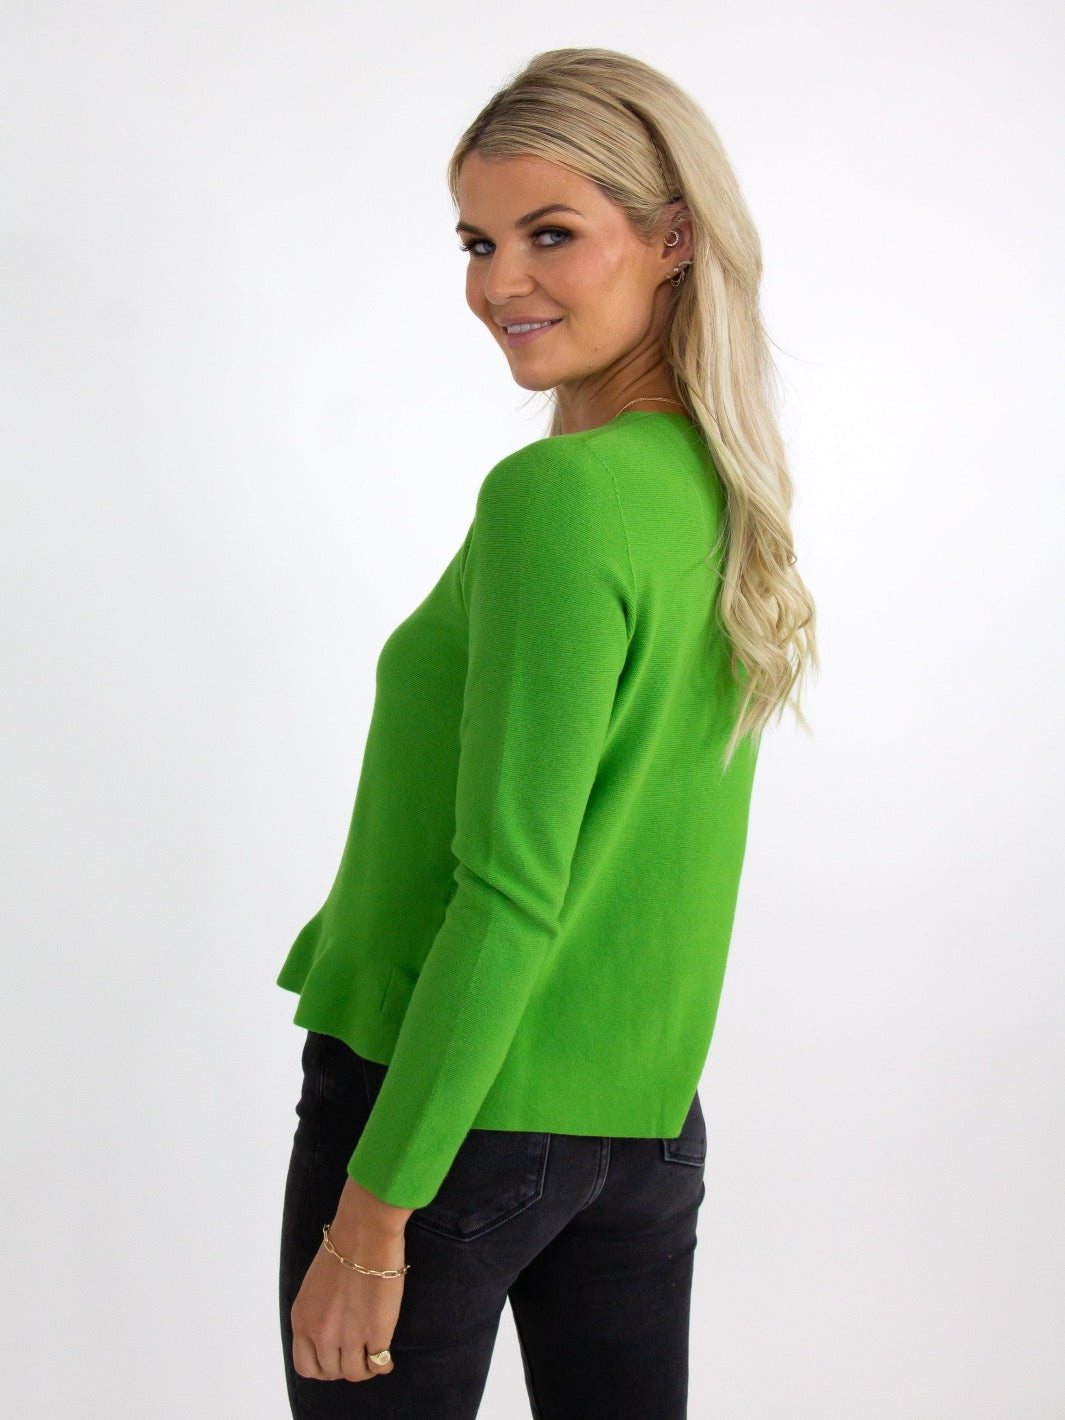 Kate & Pippa Emilia Frill Knit In Lime Green-Nicola Ross